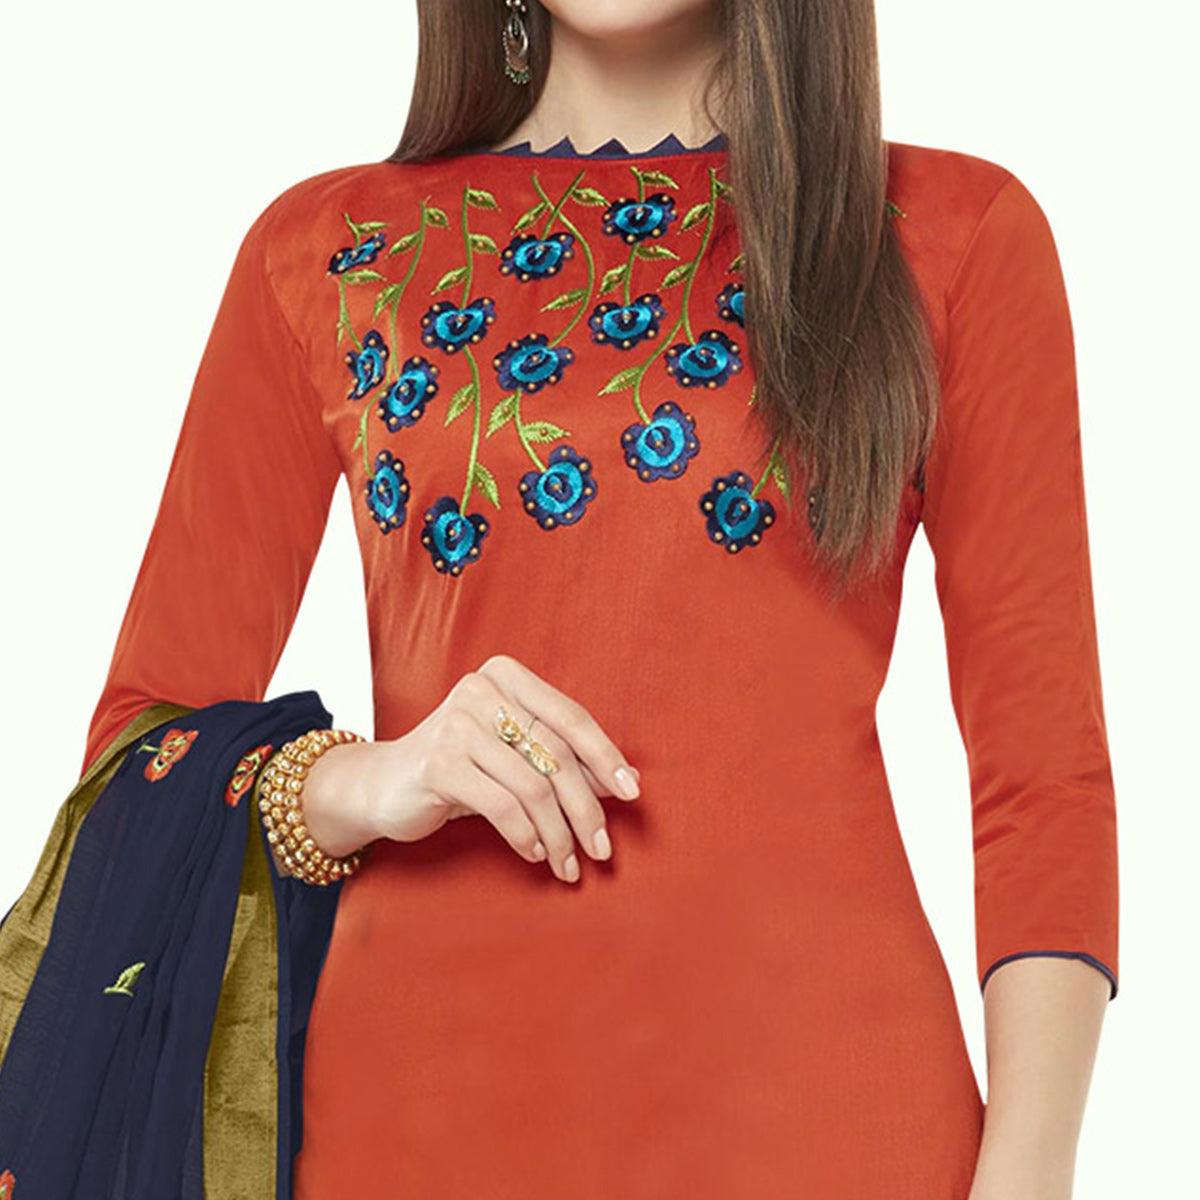 Excellent Rust Orange Colored Casual Wear Embroidered Cotton Dress Material - Peachmode